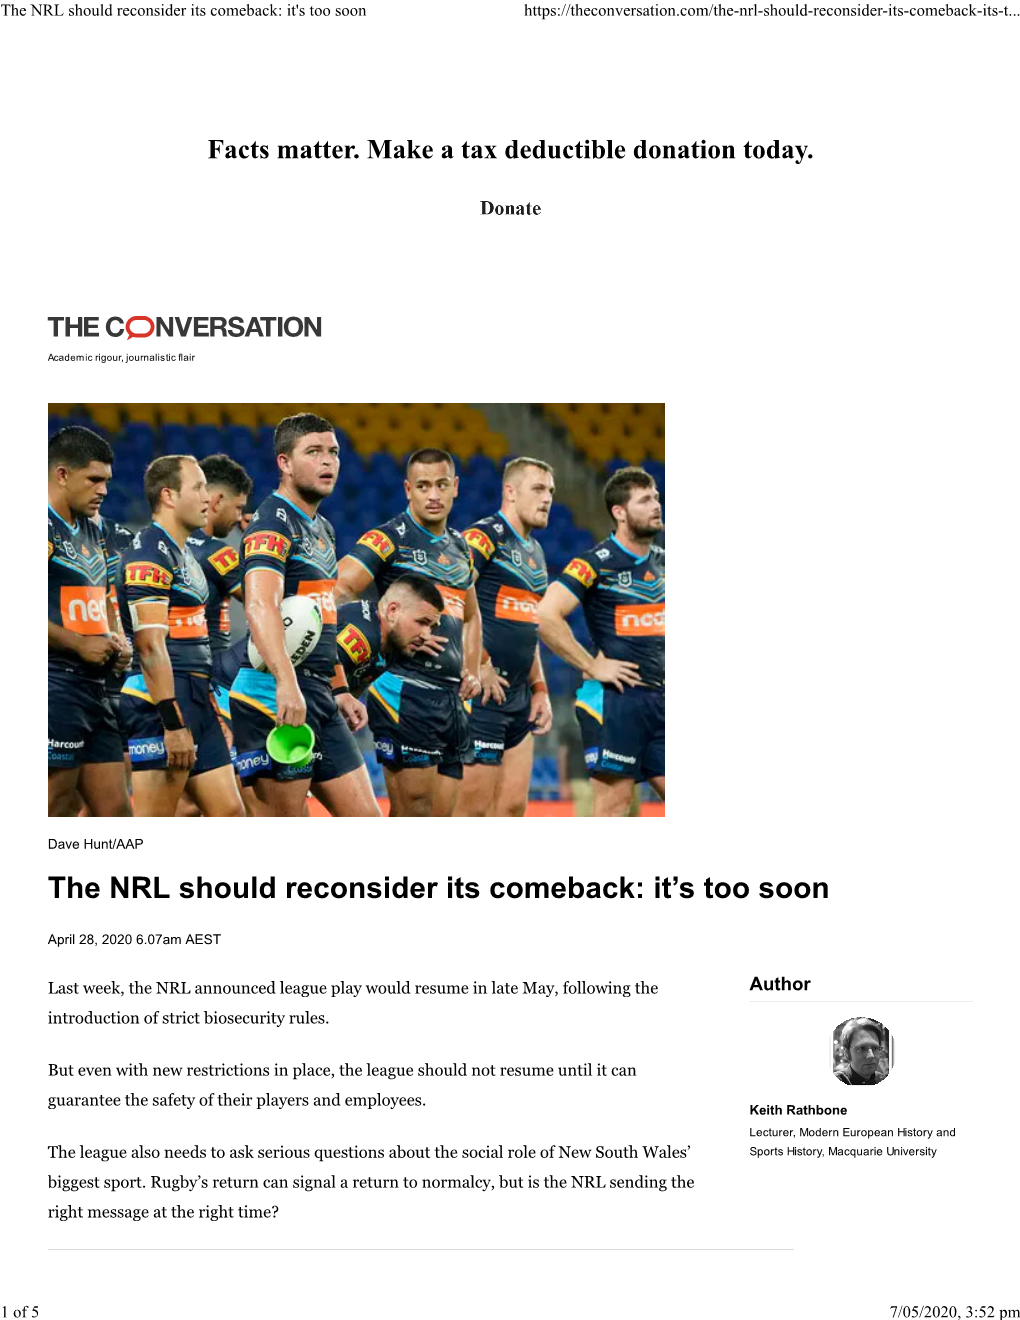 The NRL Should Reconsider Its Comeback: It's Too Soon